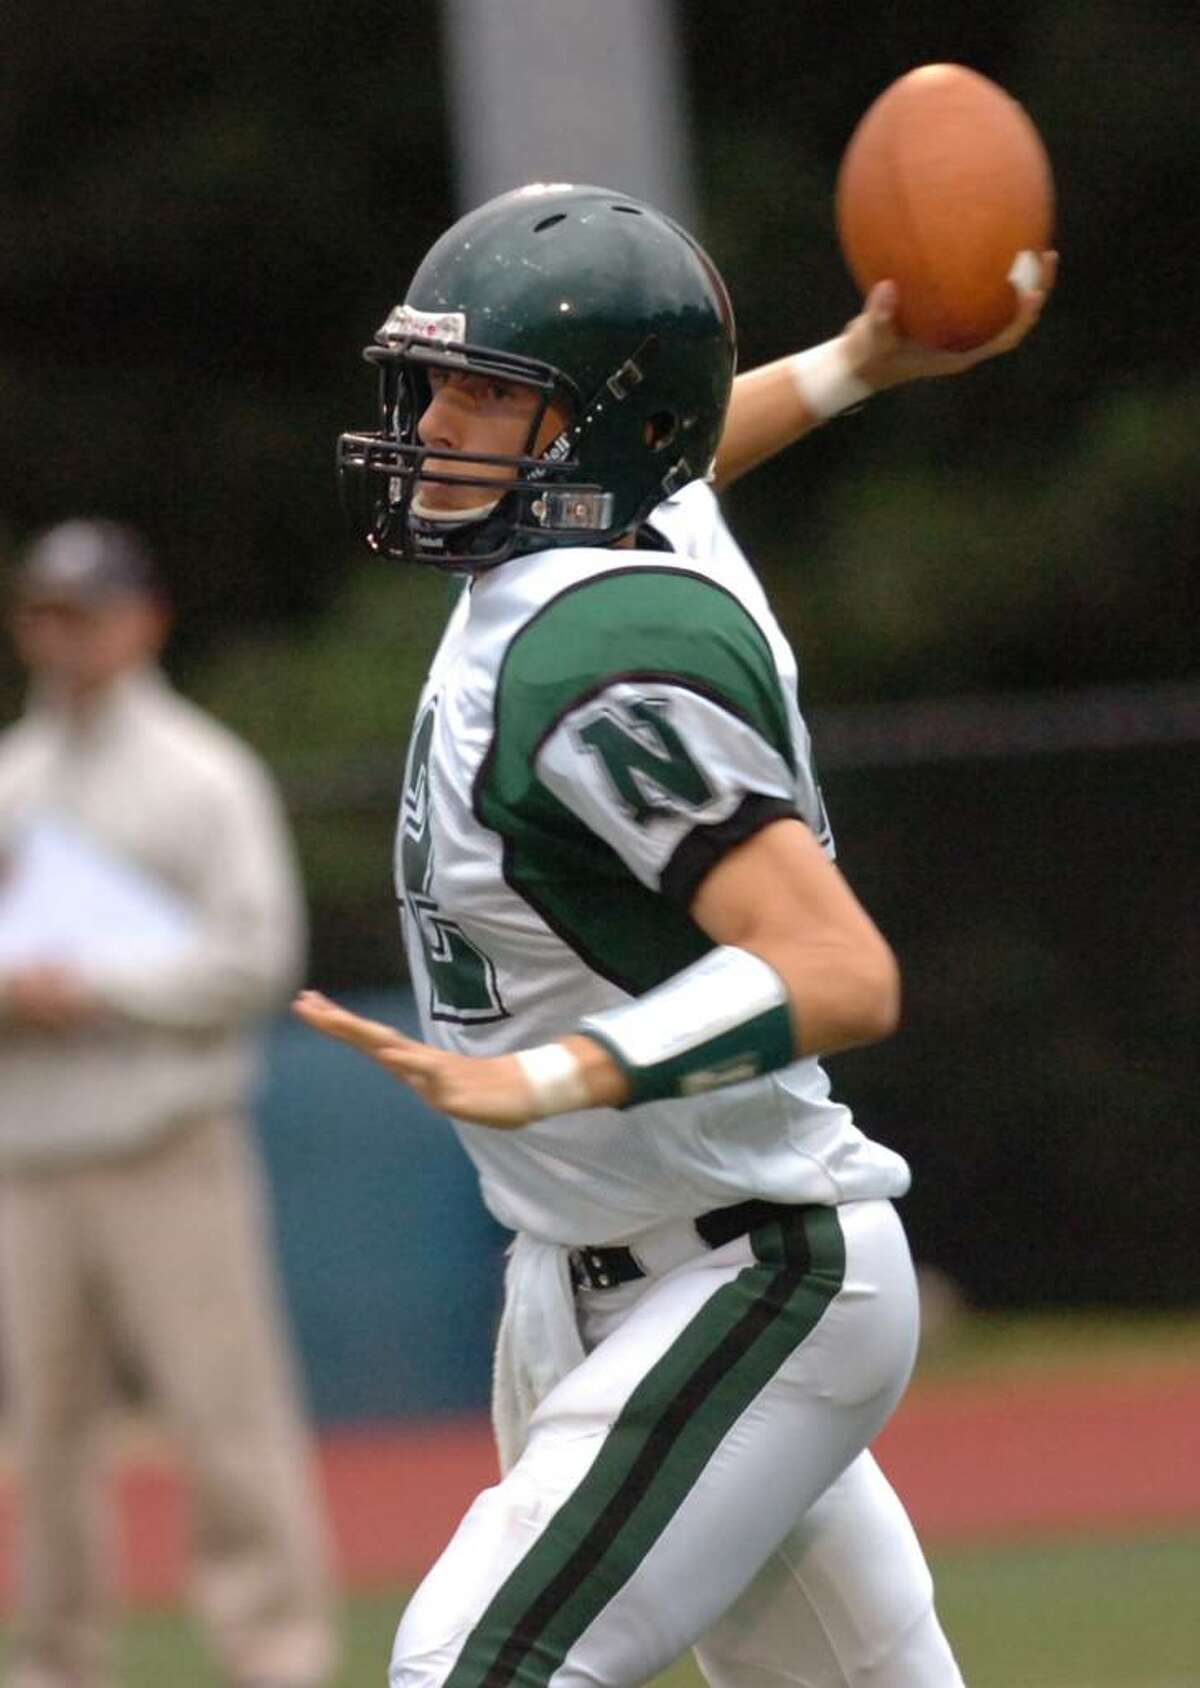 Norwalk Bear quarterback Andrew Krasnavage passes during game action. Greenwich High School meets Norwalk High School at Greenwich Cardinal Stadium for Greenwich football home opener Tuesday evening, Sept. 16, 2009.